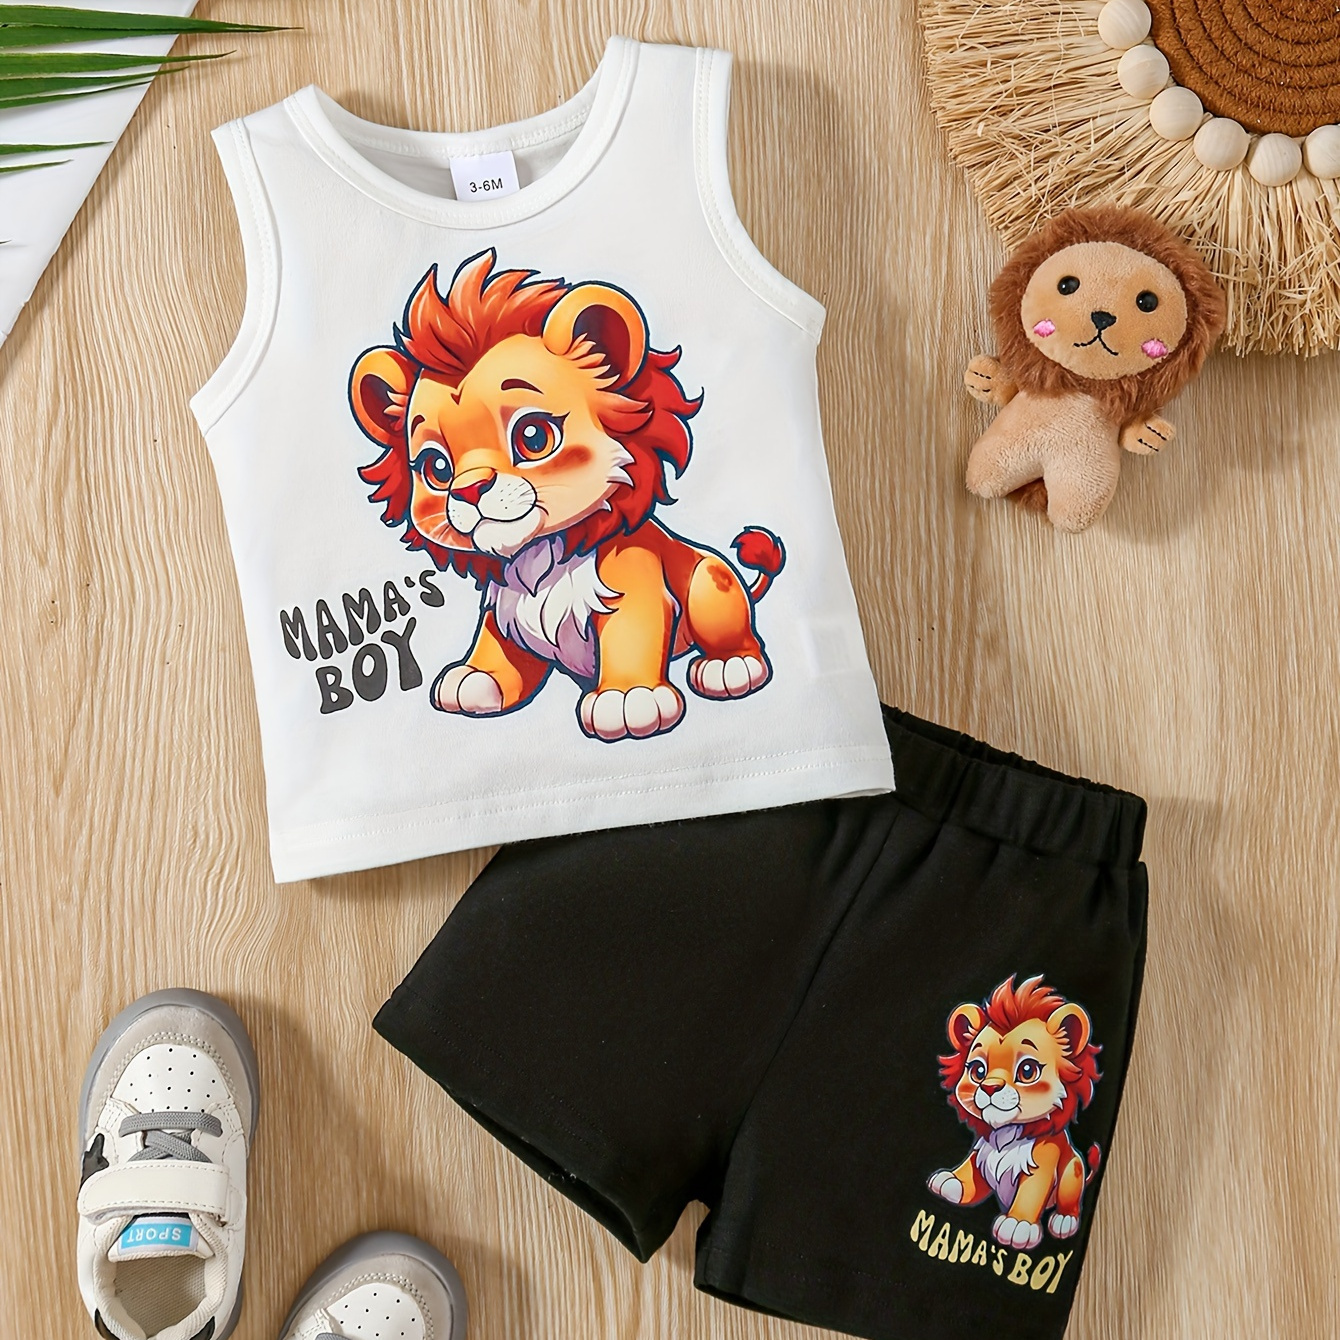 

Baby's "mama's Boy" Lion Print 2pcs Summer Casual Outfit, Tank Top & Shorts Set, Toddler & Infant Boy's Clothes